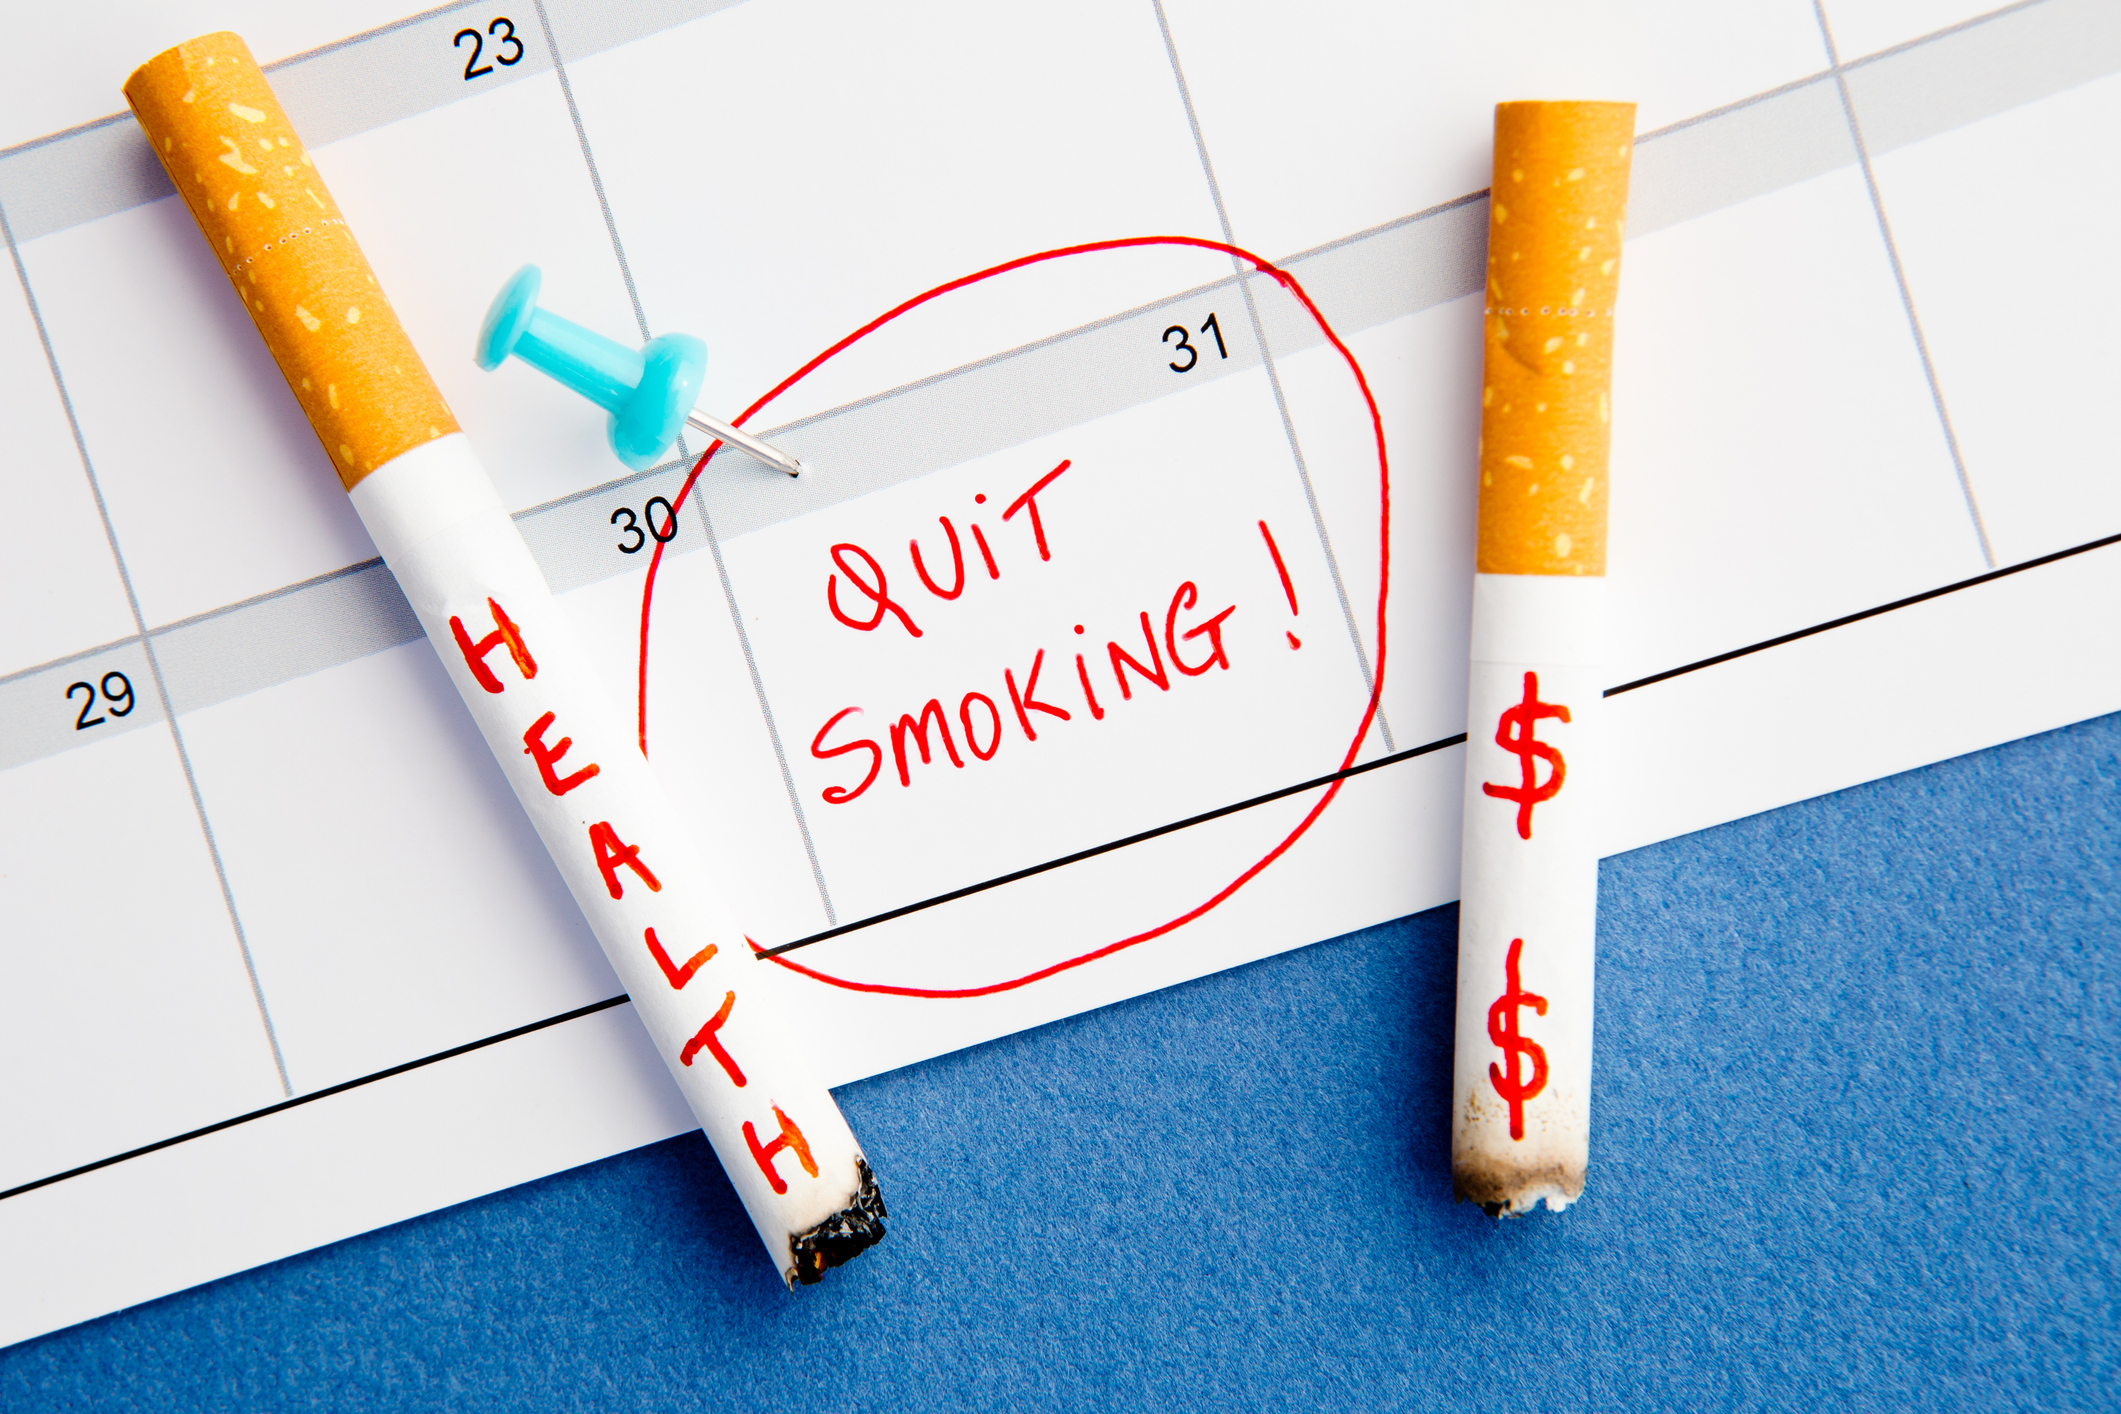 How Proposed EEOC Wellness Incentive Rules May Impact Workplace Tobacco Cessation Programs